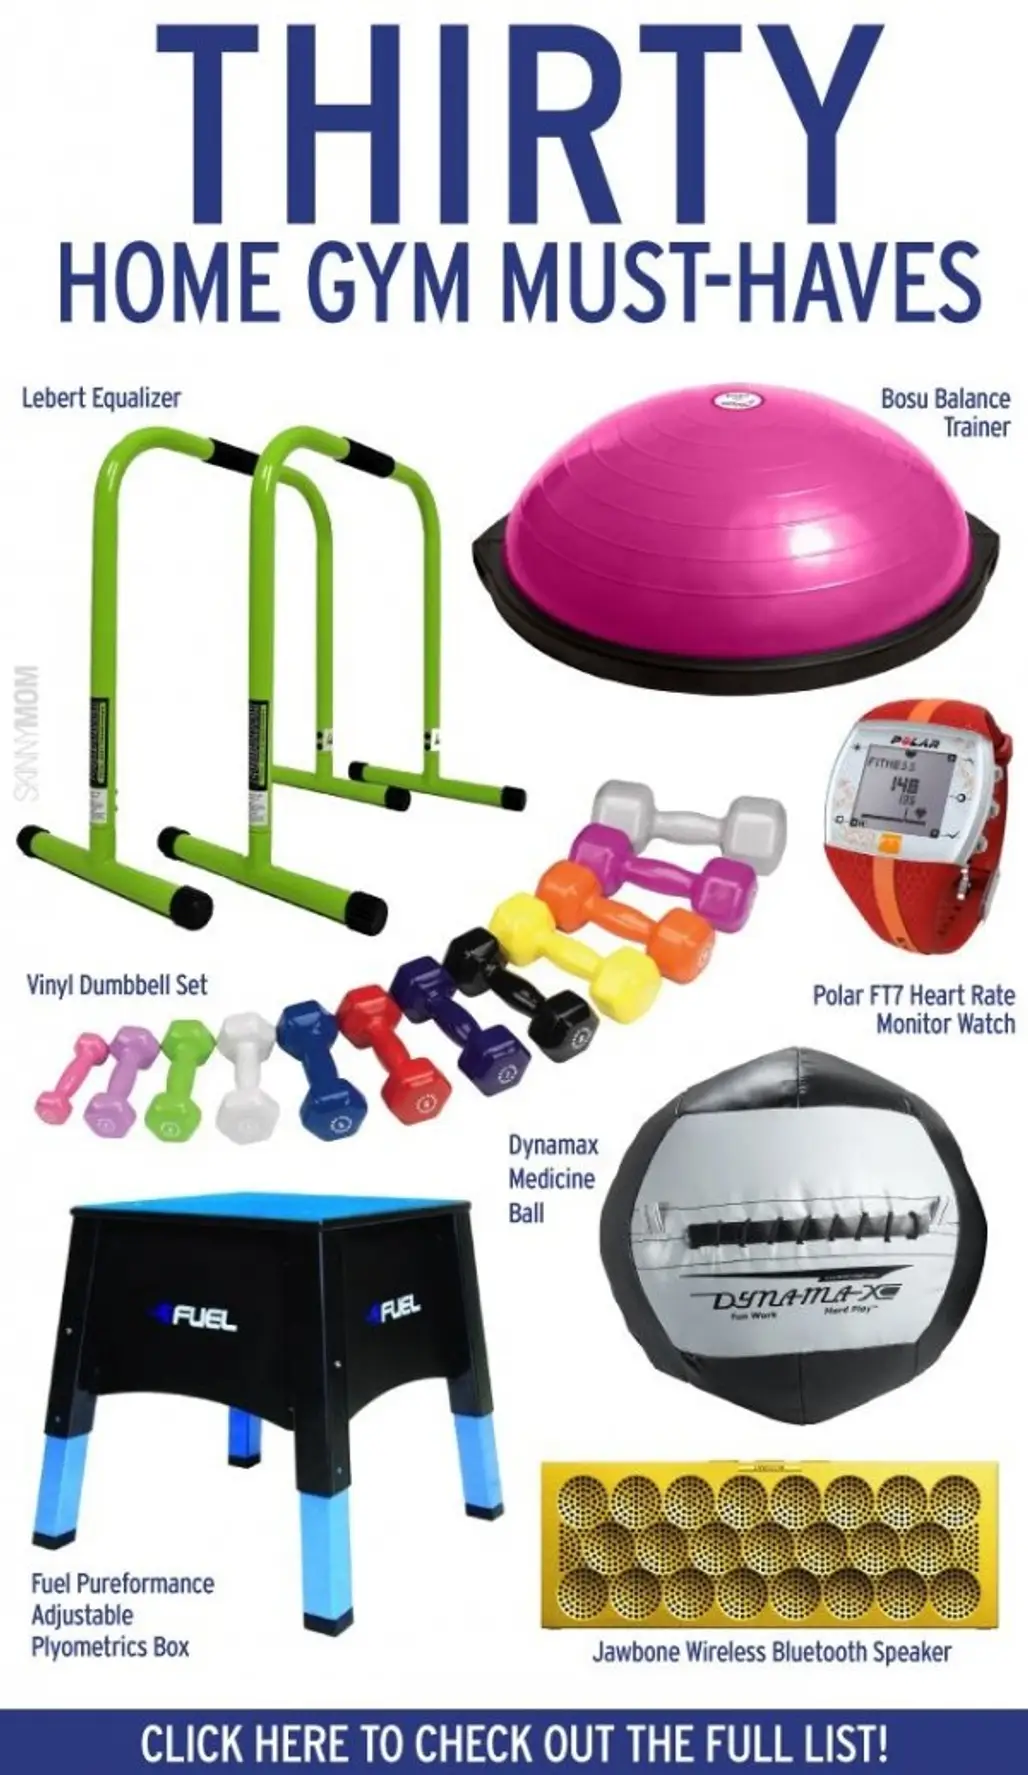 Home Gym Must Haves